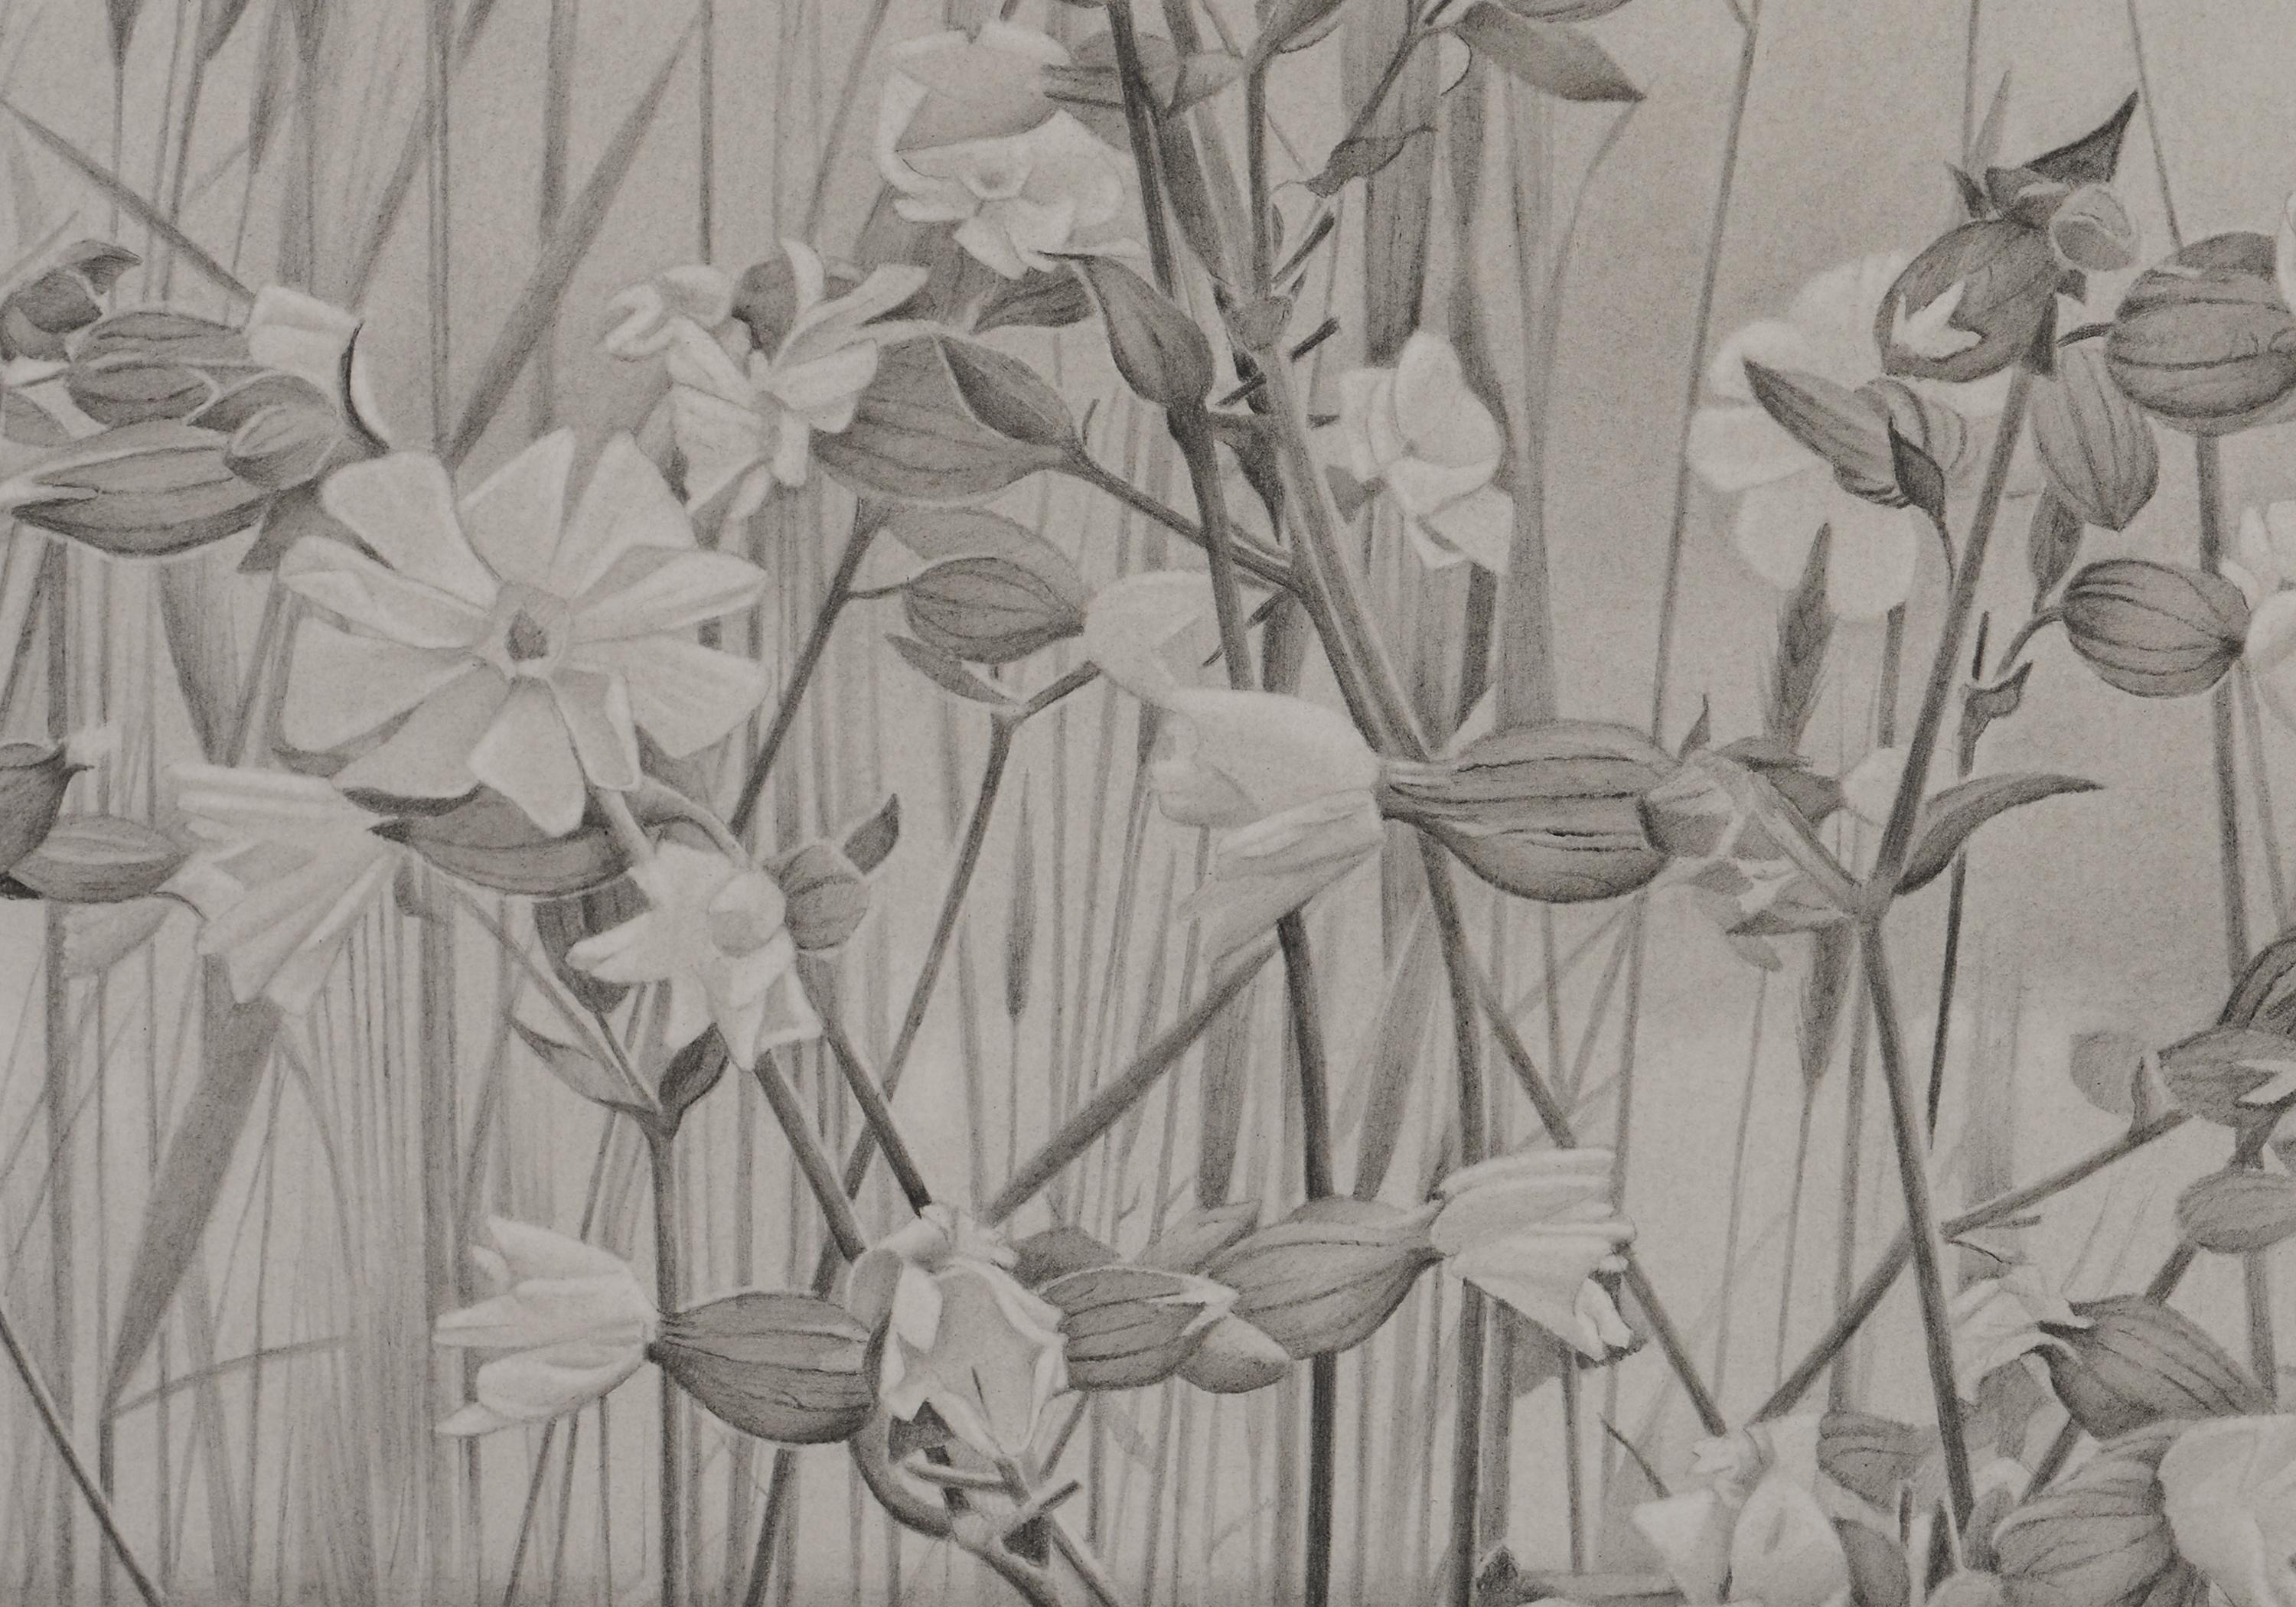 Wildflowers and Sky, Vermont Landscape Black & White Graphite Drawing - American Realist Art by Mary Reilly